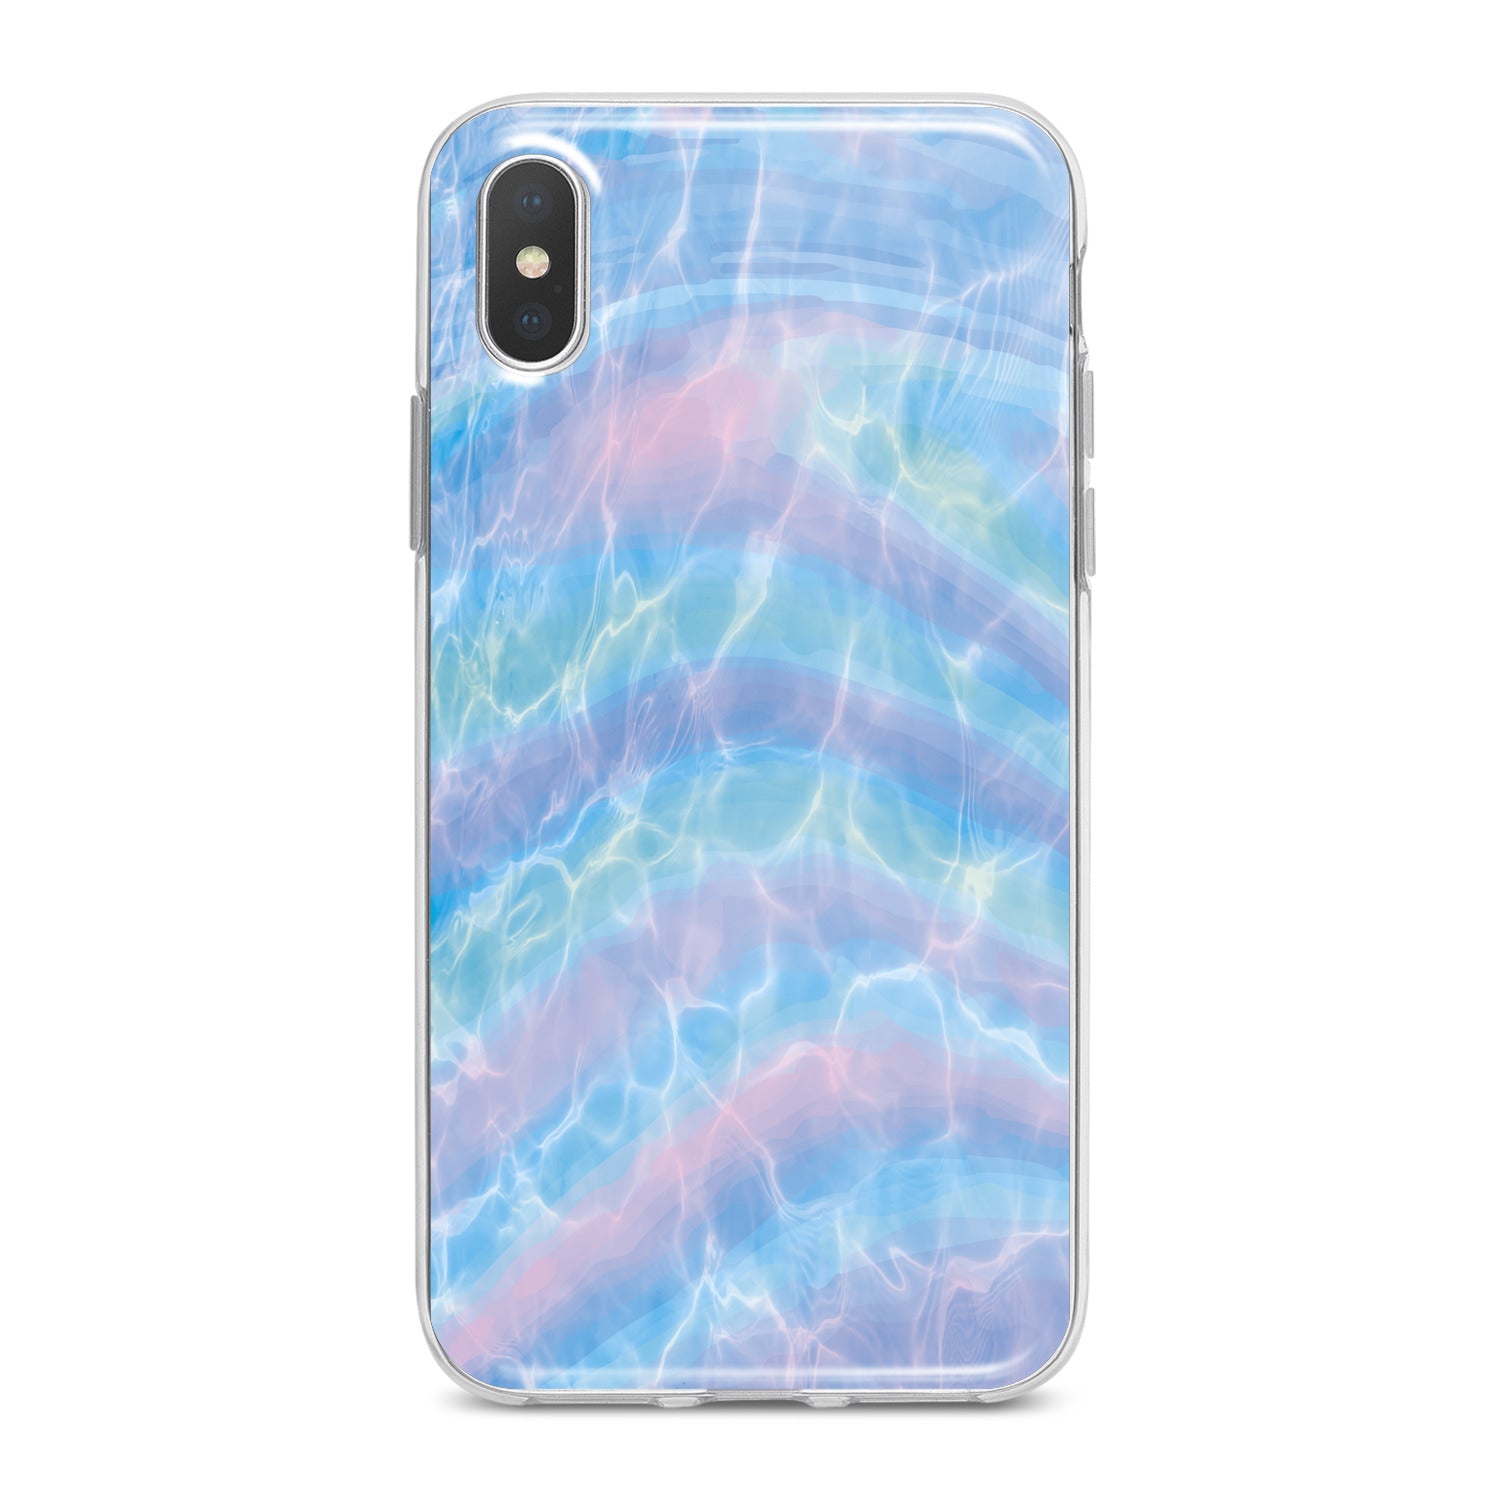 Lex Altern Awesome Marble Phone Case for your iPhone & Android phone.